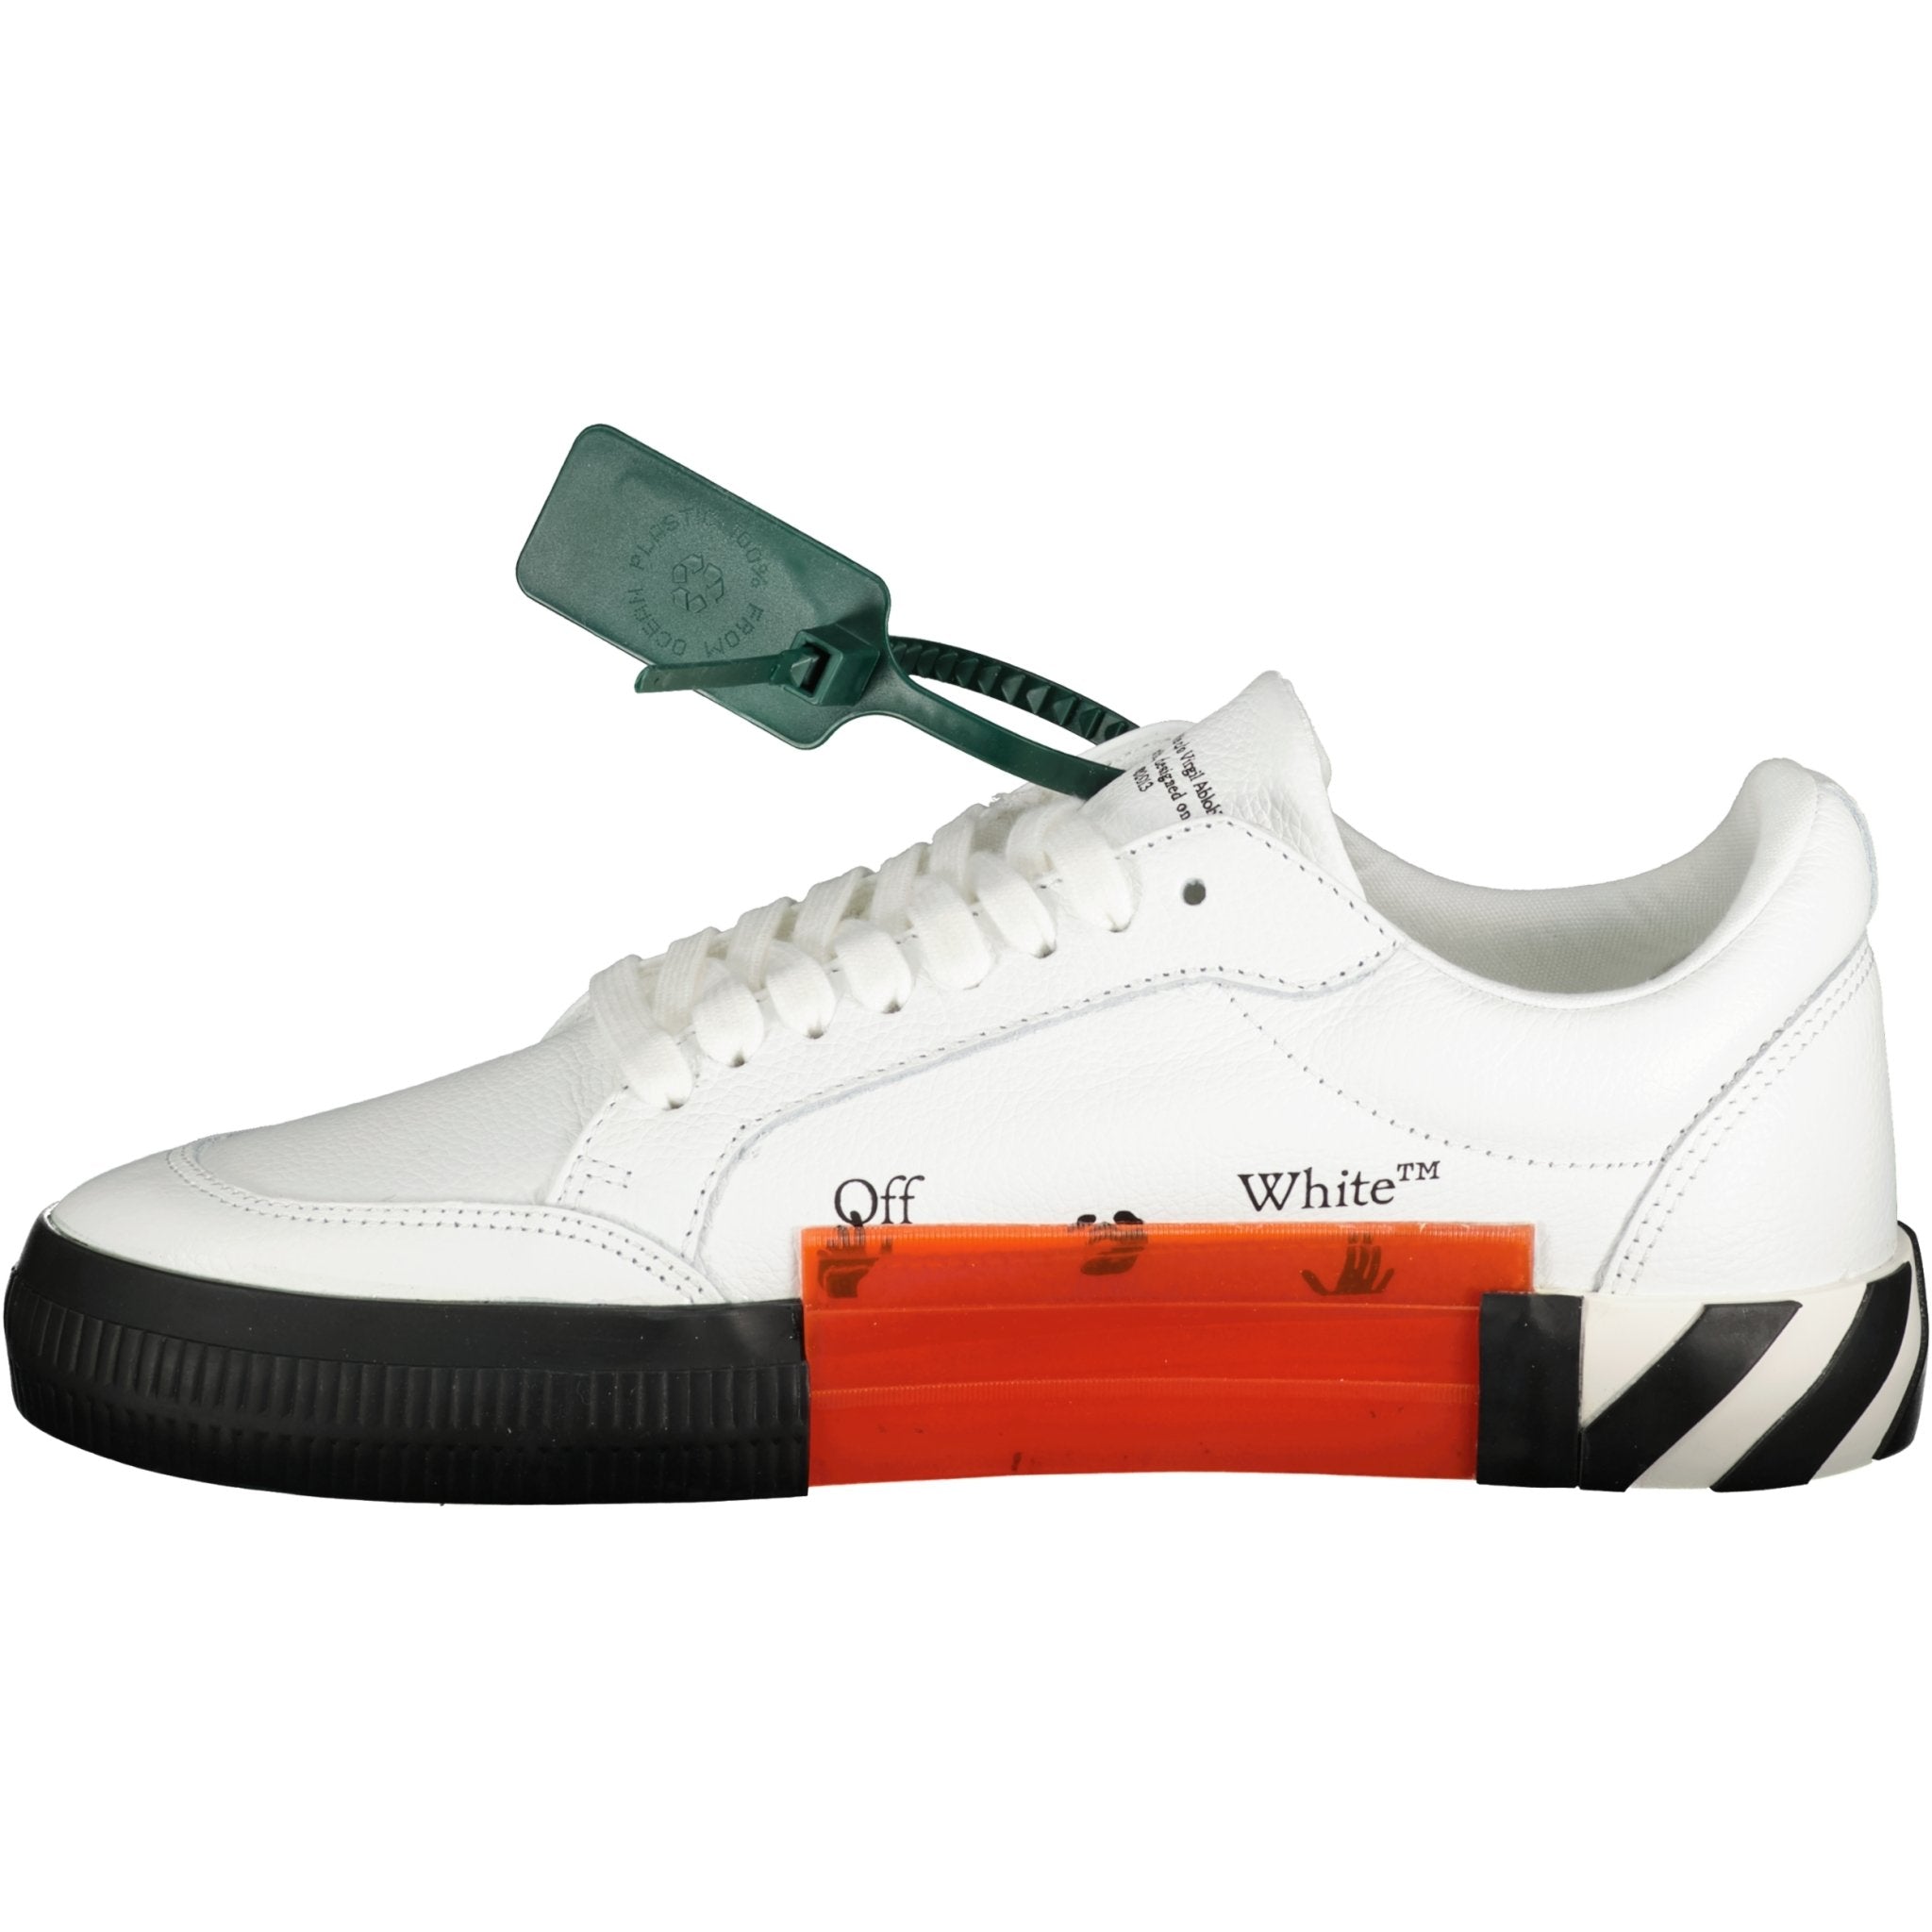 Off-White Vulcanized Low Top Trainers Black & White